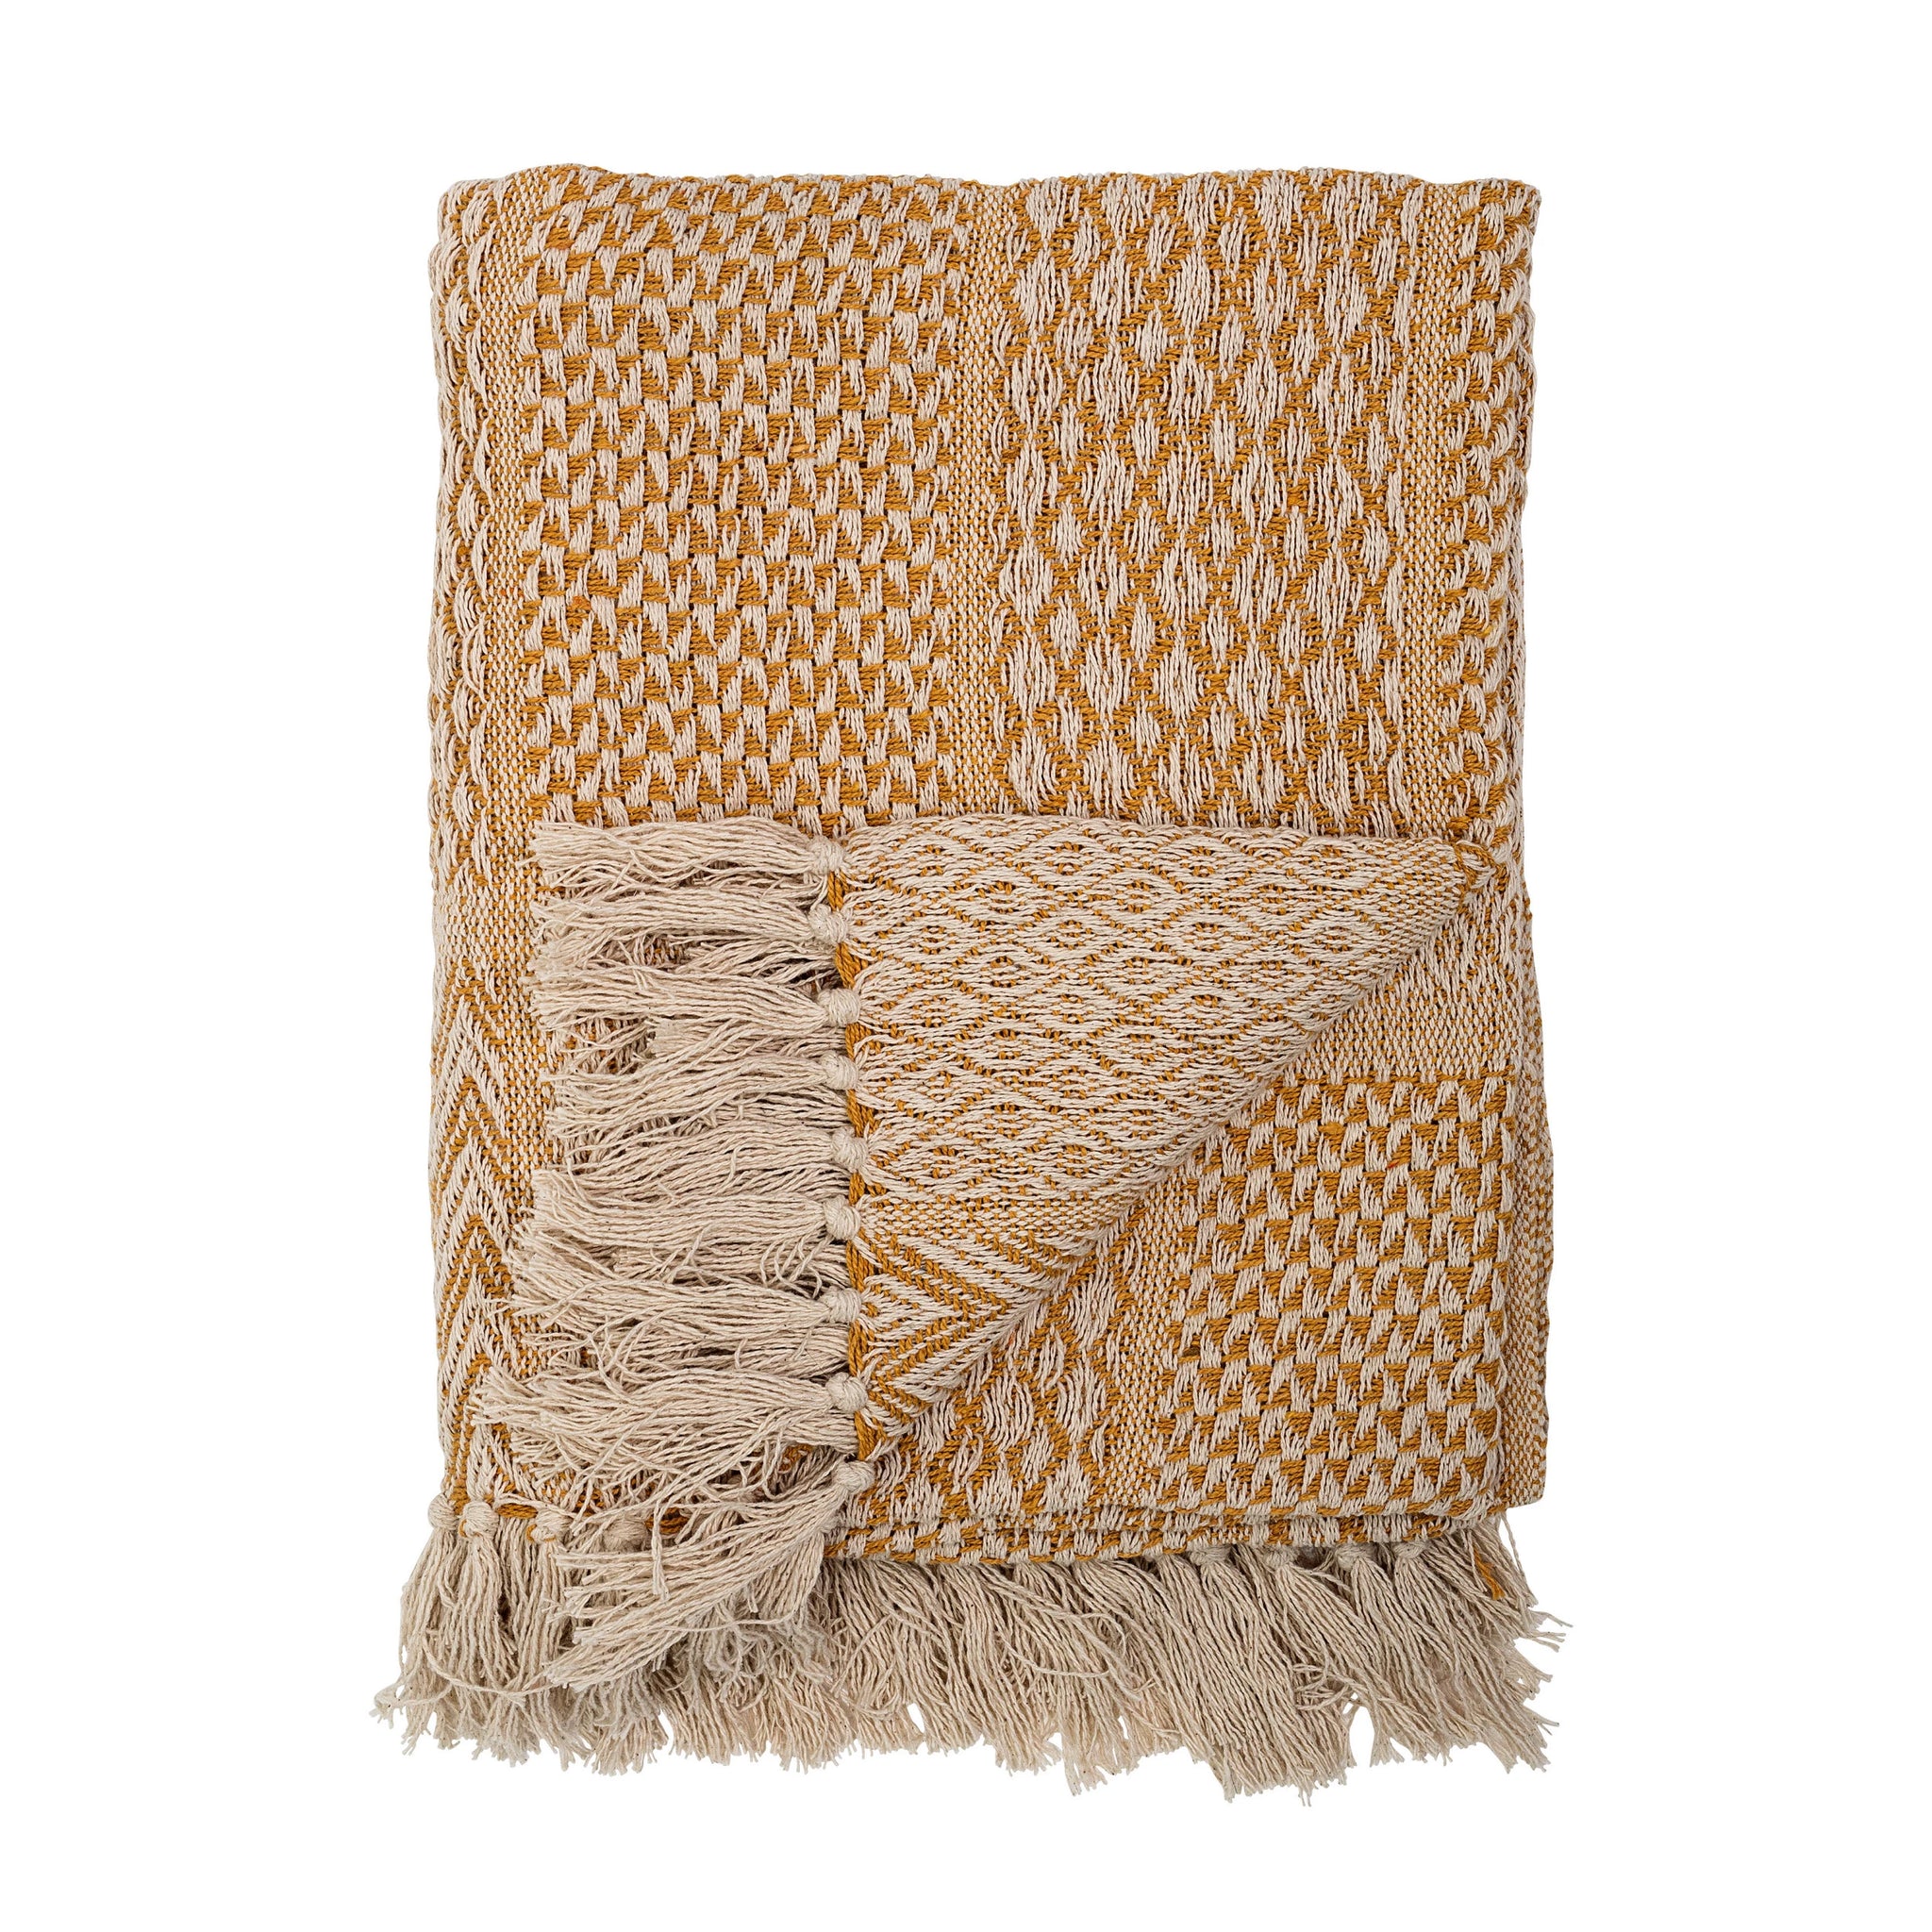 Mustard Yellow Multi-Patterned Knit Throw with Fringe